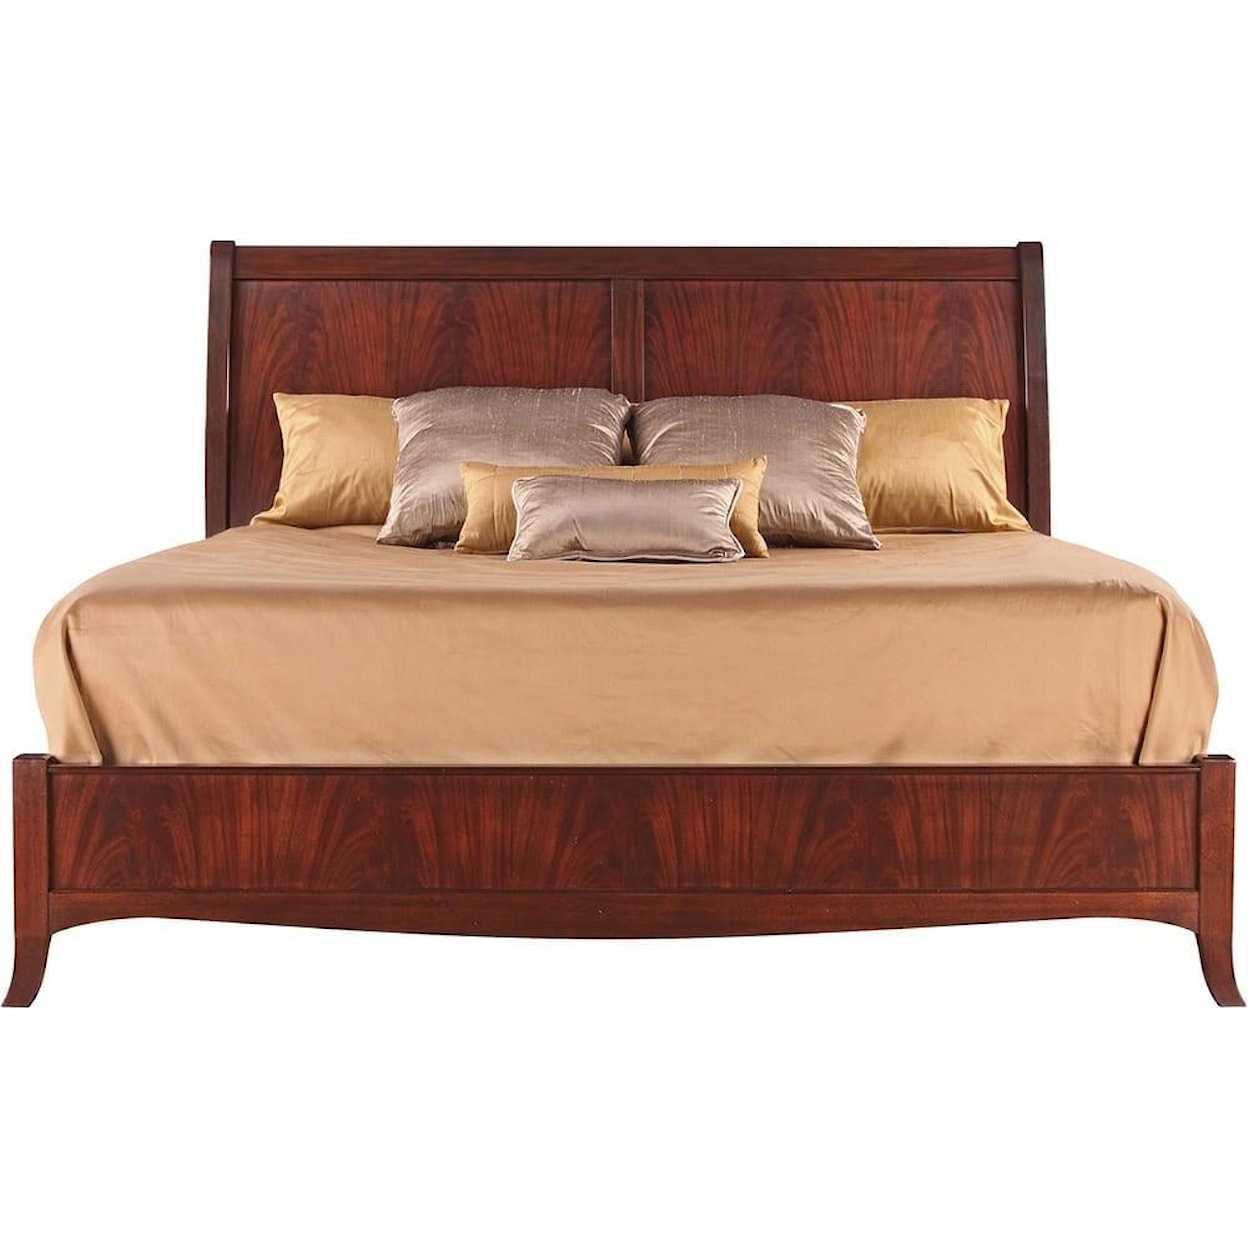 Stickley Classics Cherry and Mahogany Whitehall Sleigh Bed